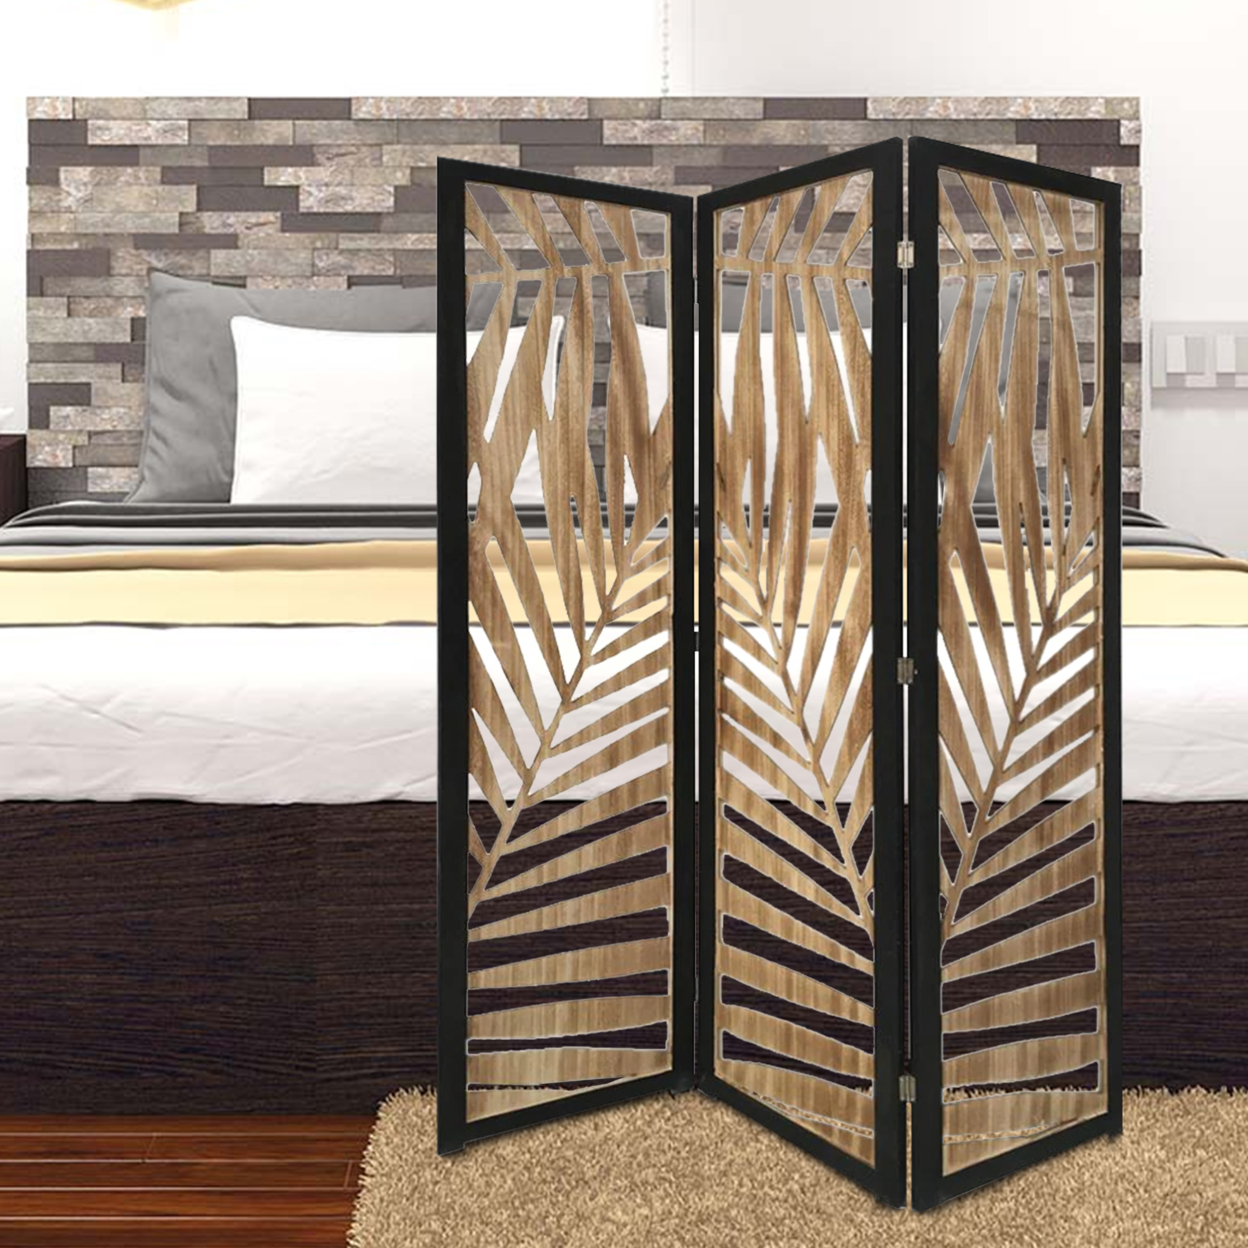 3 Panel Wooden Screen With Laser Cut Tropical Leaf Design, Brown And Black- Saltoro Sherpi